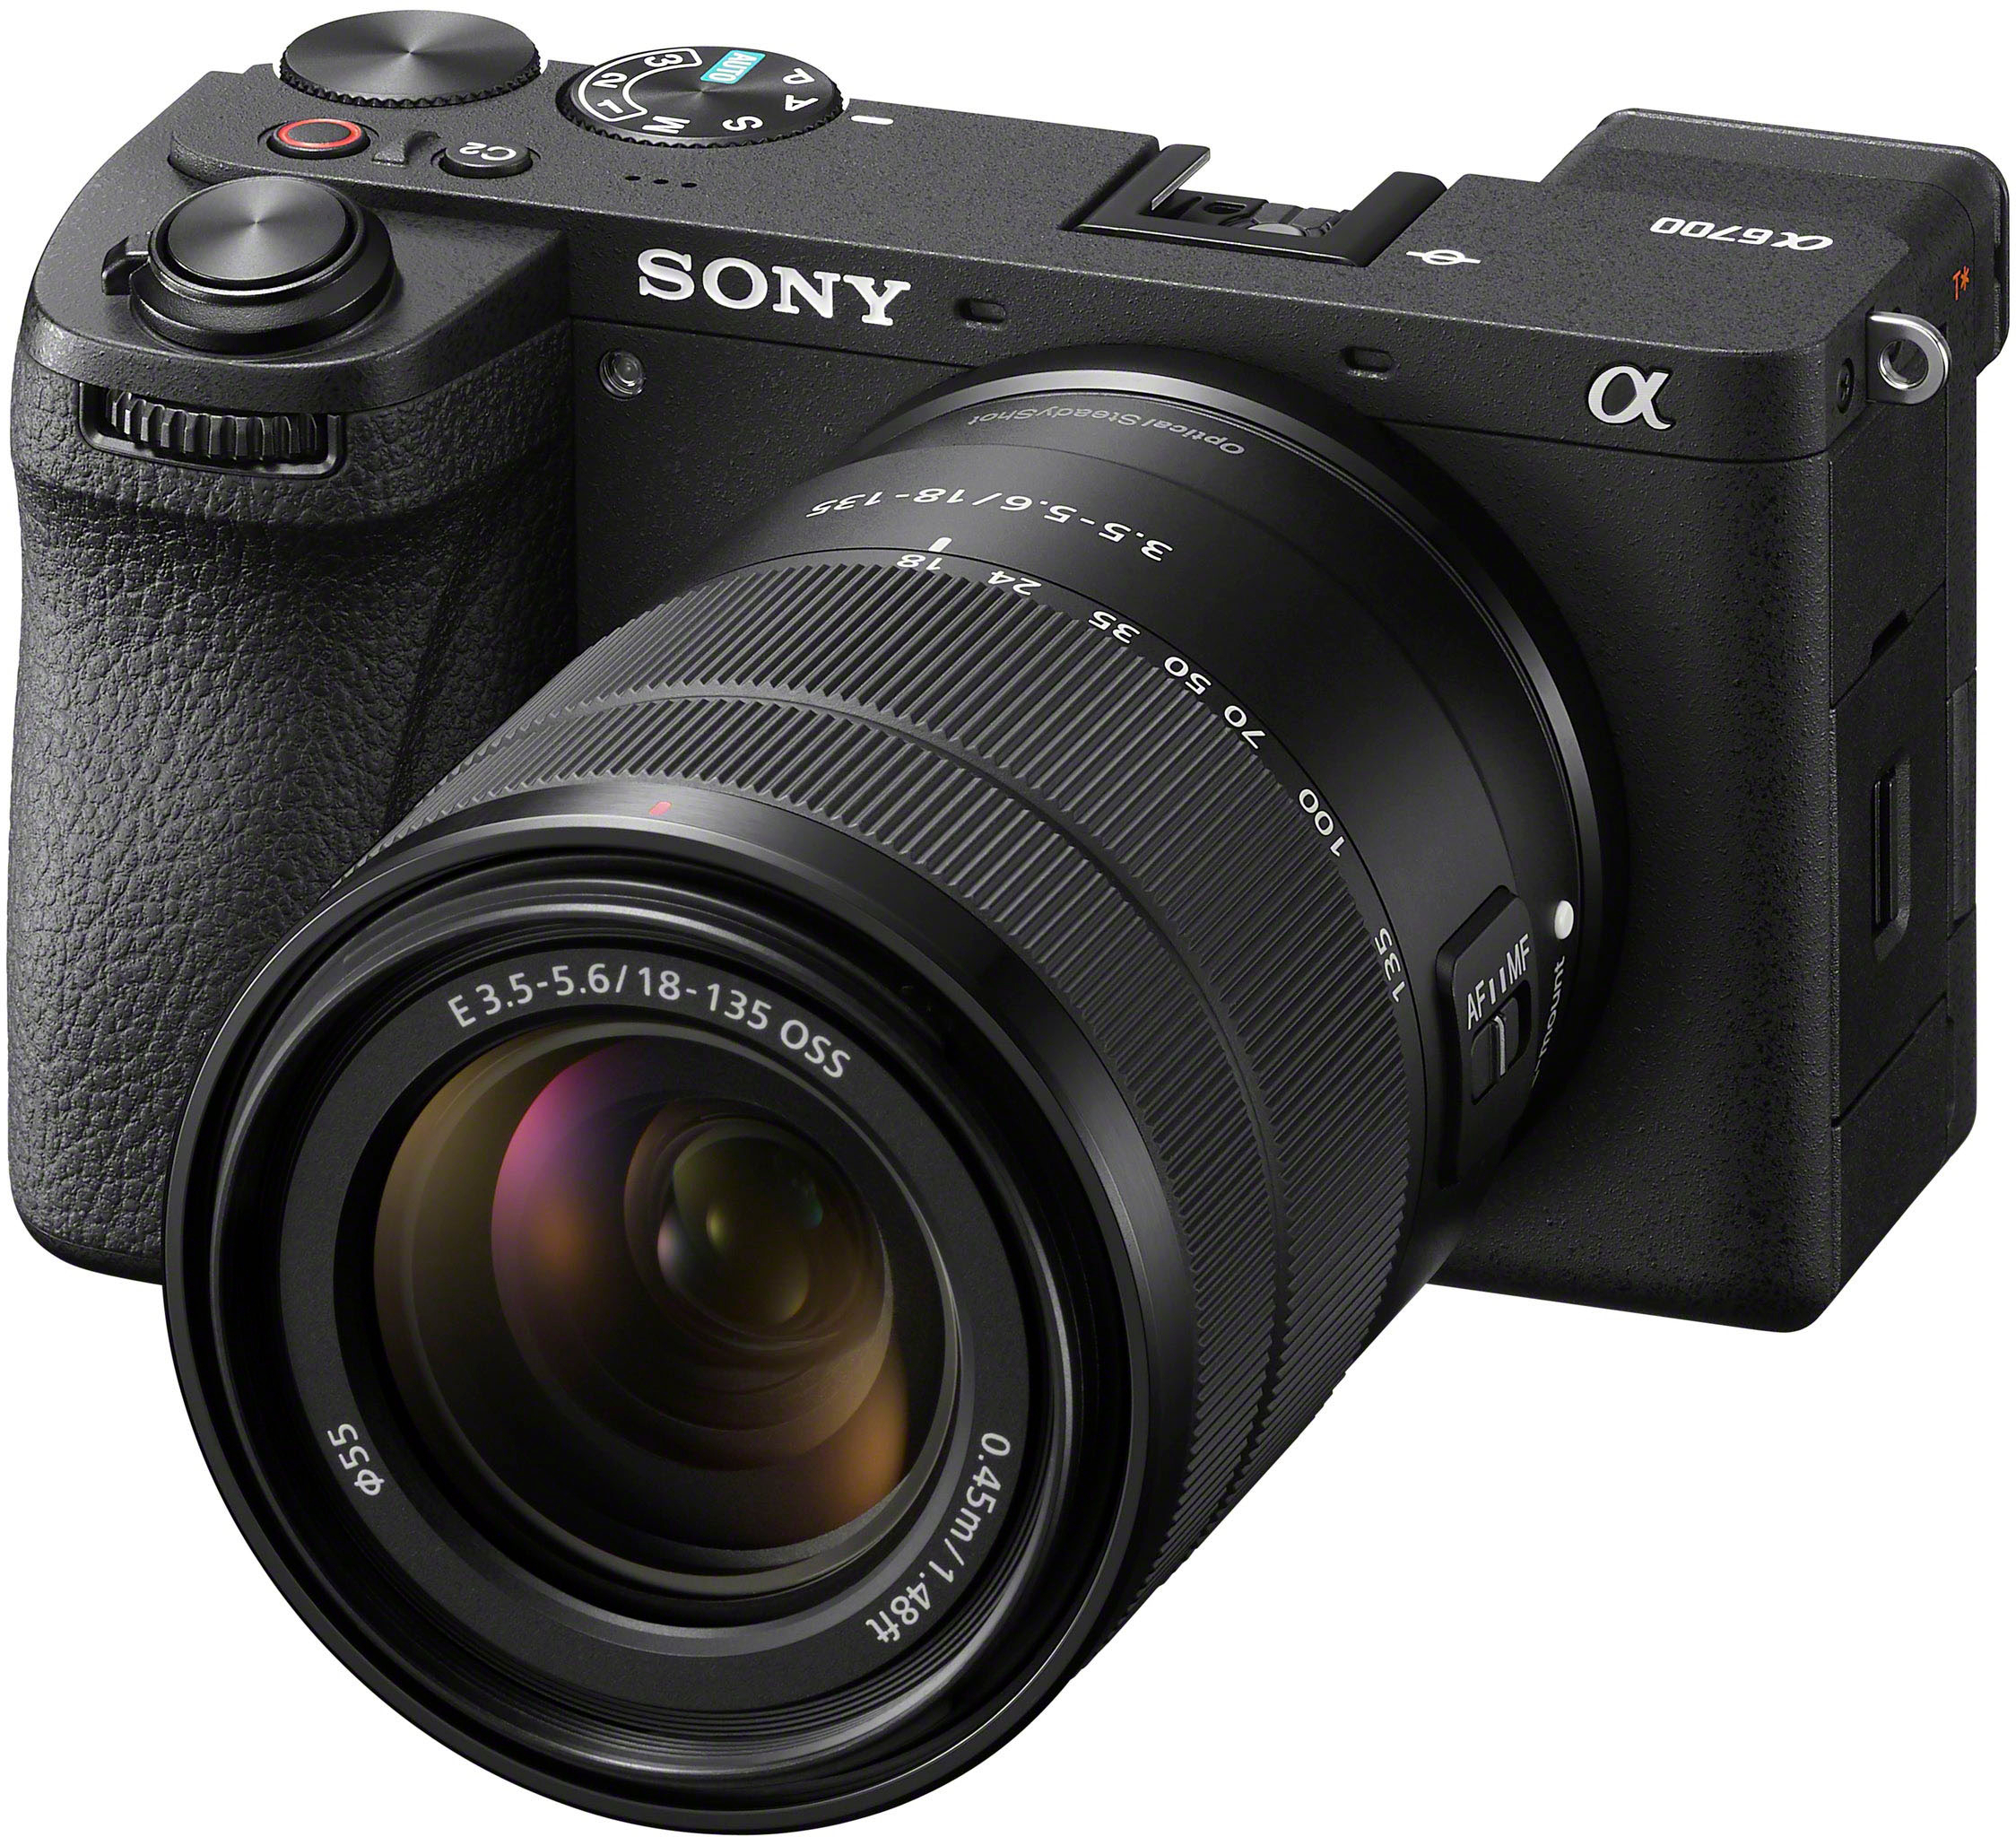 Black mm Buy ILCE6700M/B with 6700 Camera Alpha Best Lens APS-C 18-135 Sony - Mirrorless E